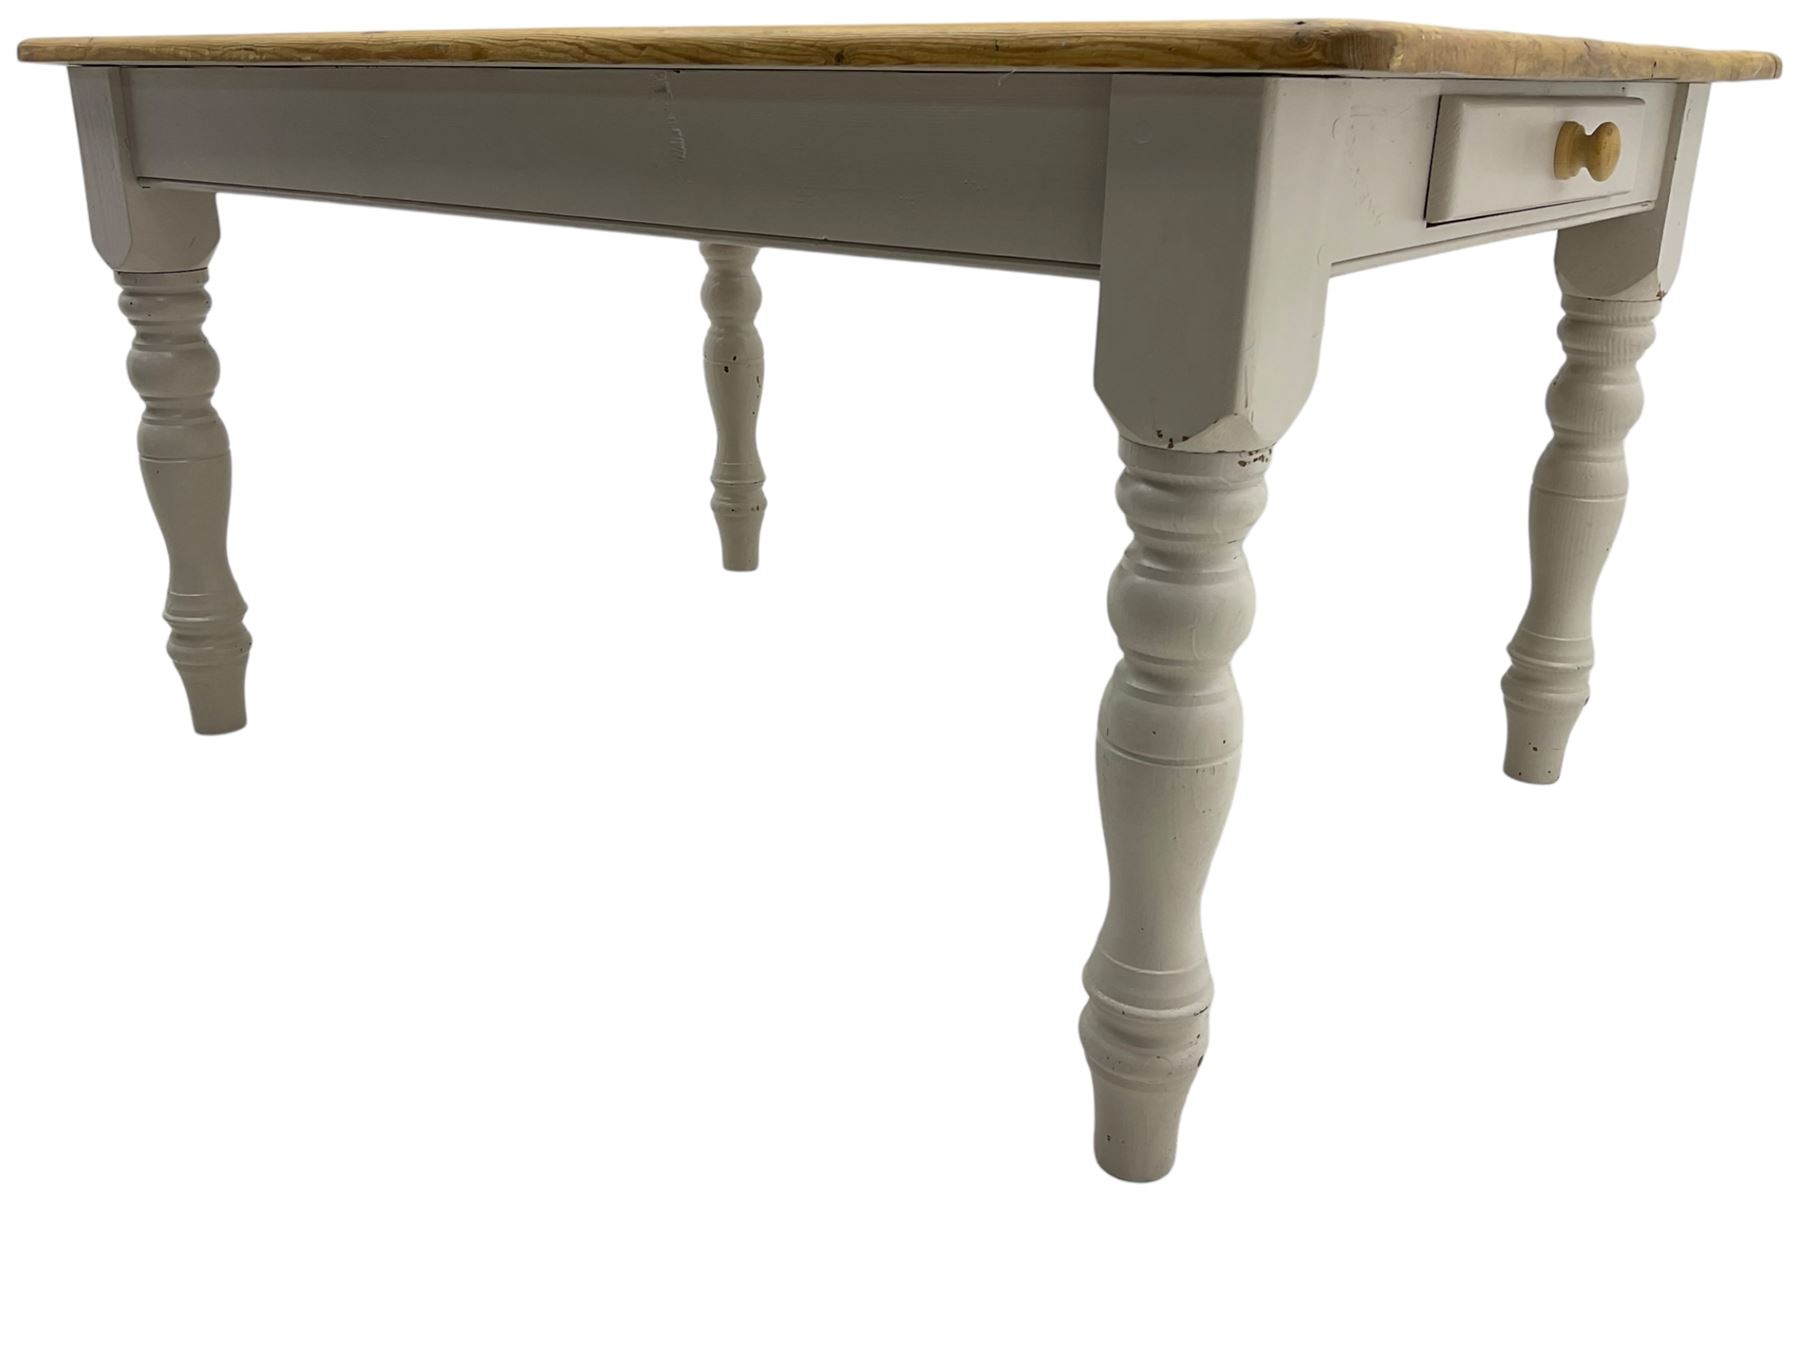 Pine farmhouse kitchen dining table - Image 7 of 7